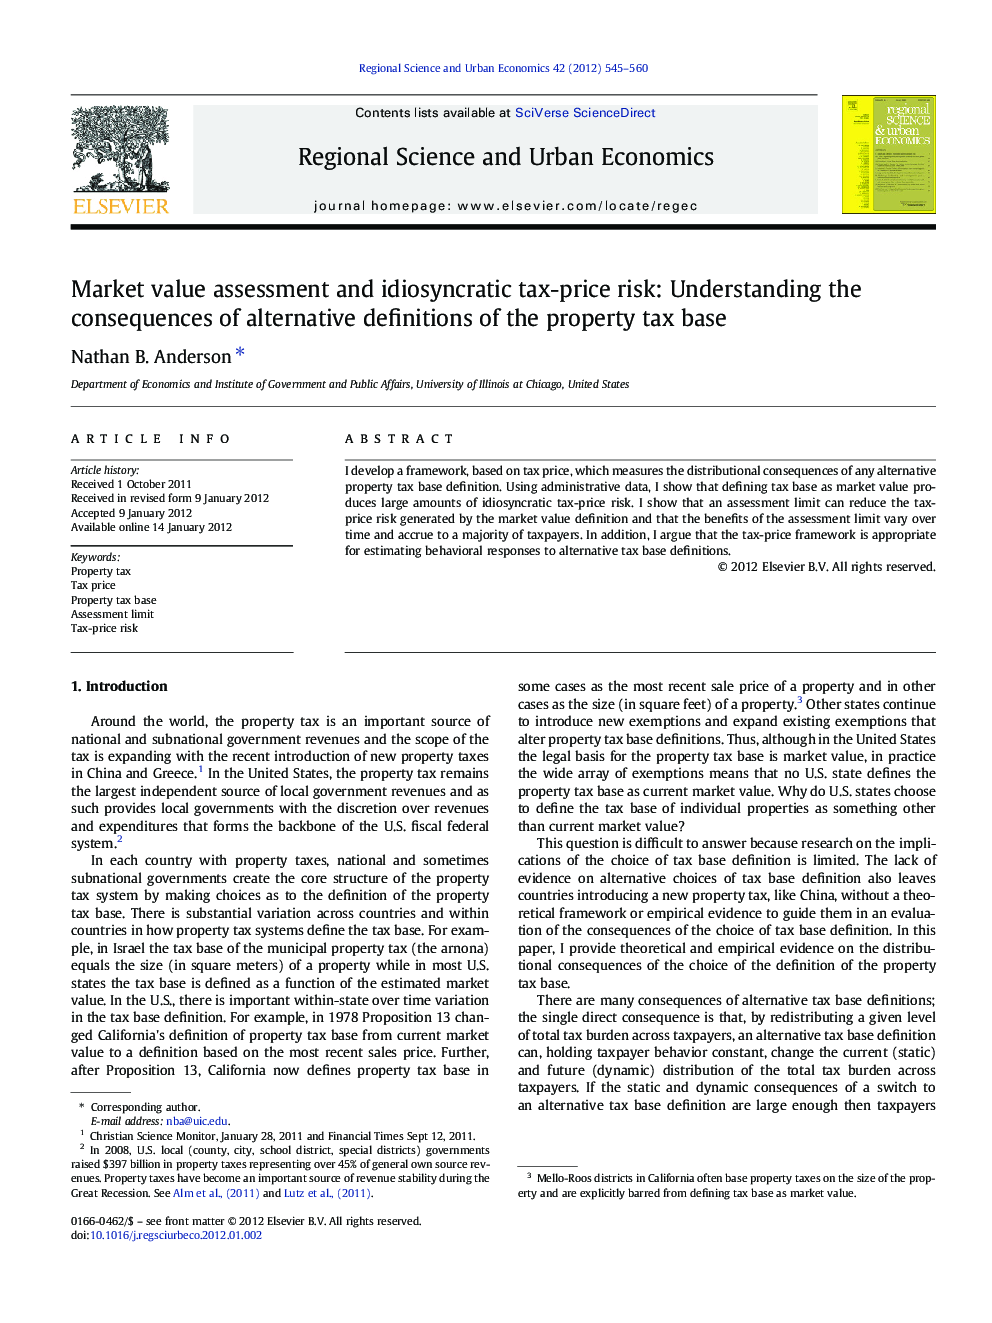 Market value assessment and idiosyncratic tax-price risk: Understanding the consequences of alternative definitions of the property tax base